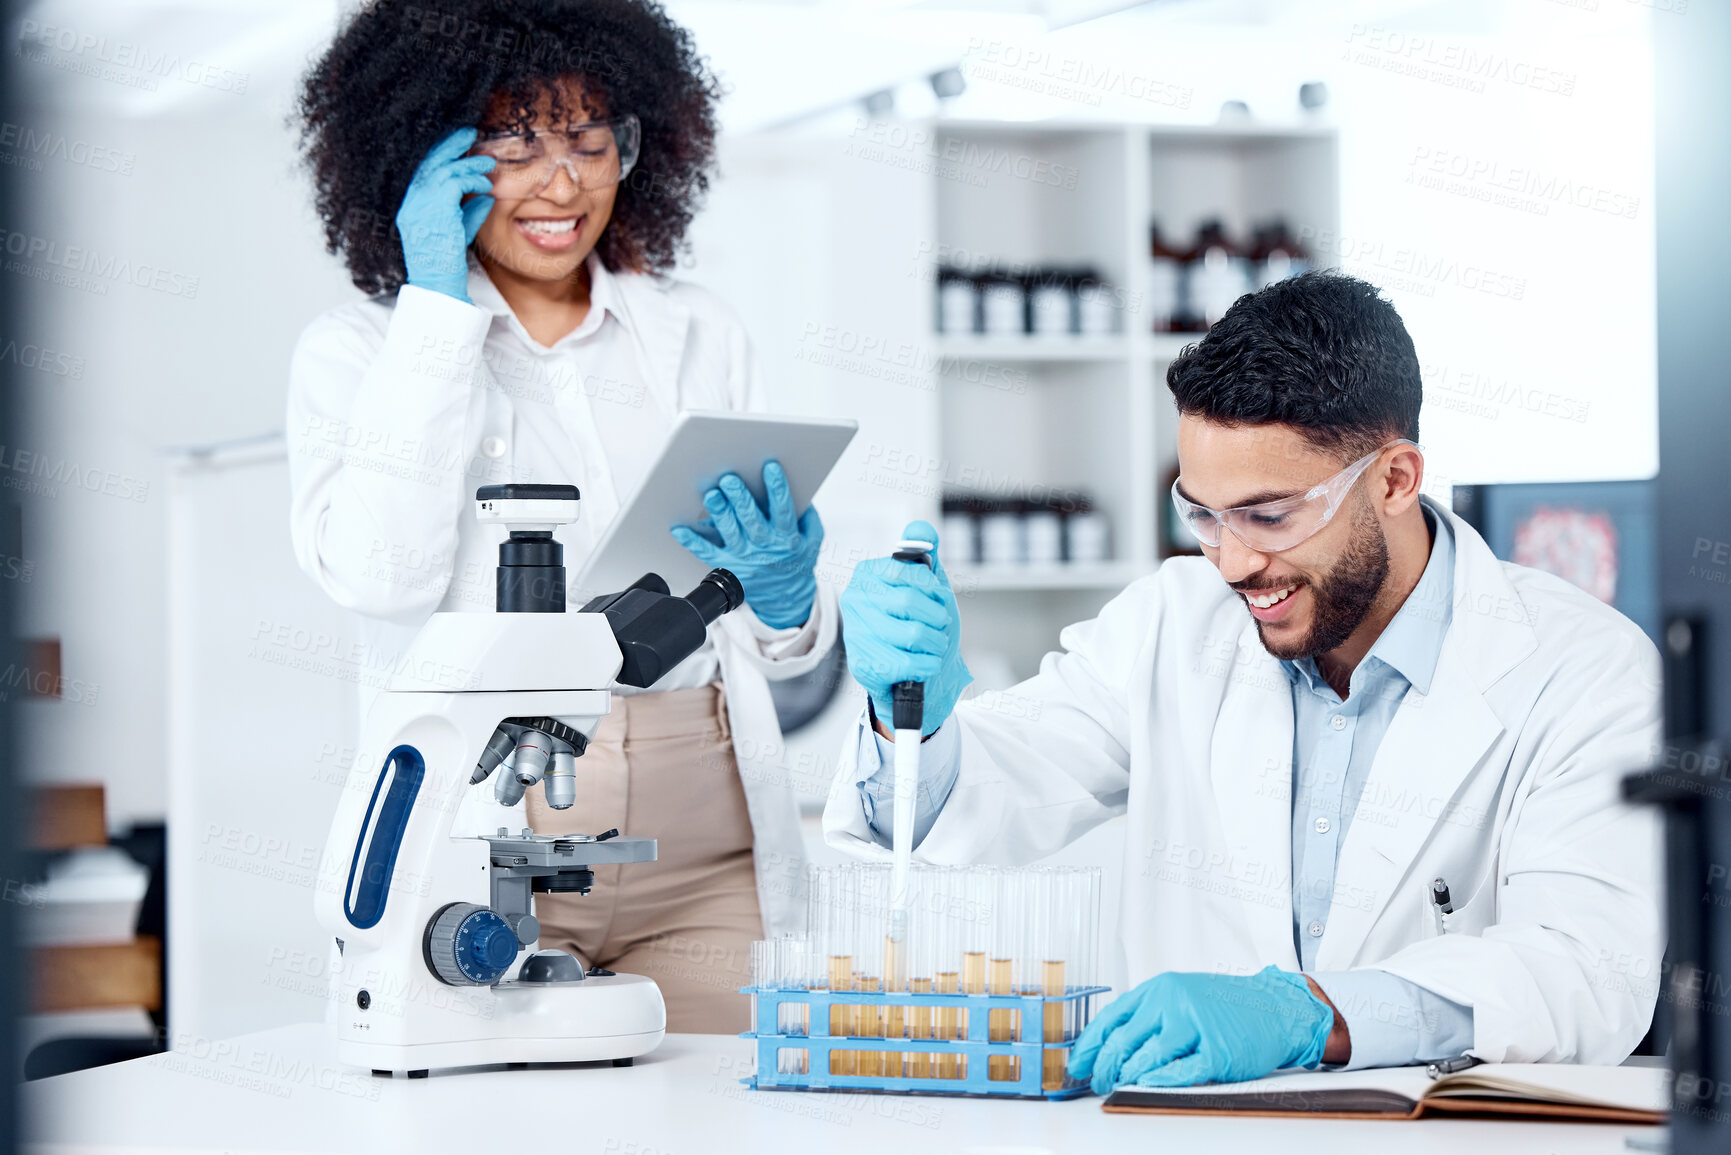 Buy stock photo Two mixed race scientists wearing safety equipment while conducting medical research experiments with pipette and test tubes in a lab. Colleagues planning and recording data findings on digital tablet